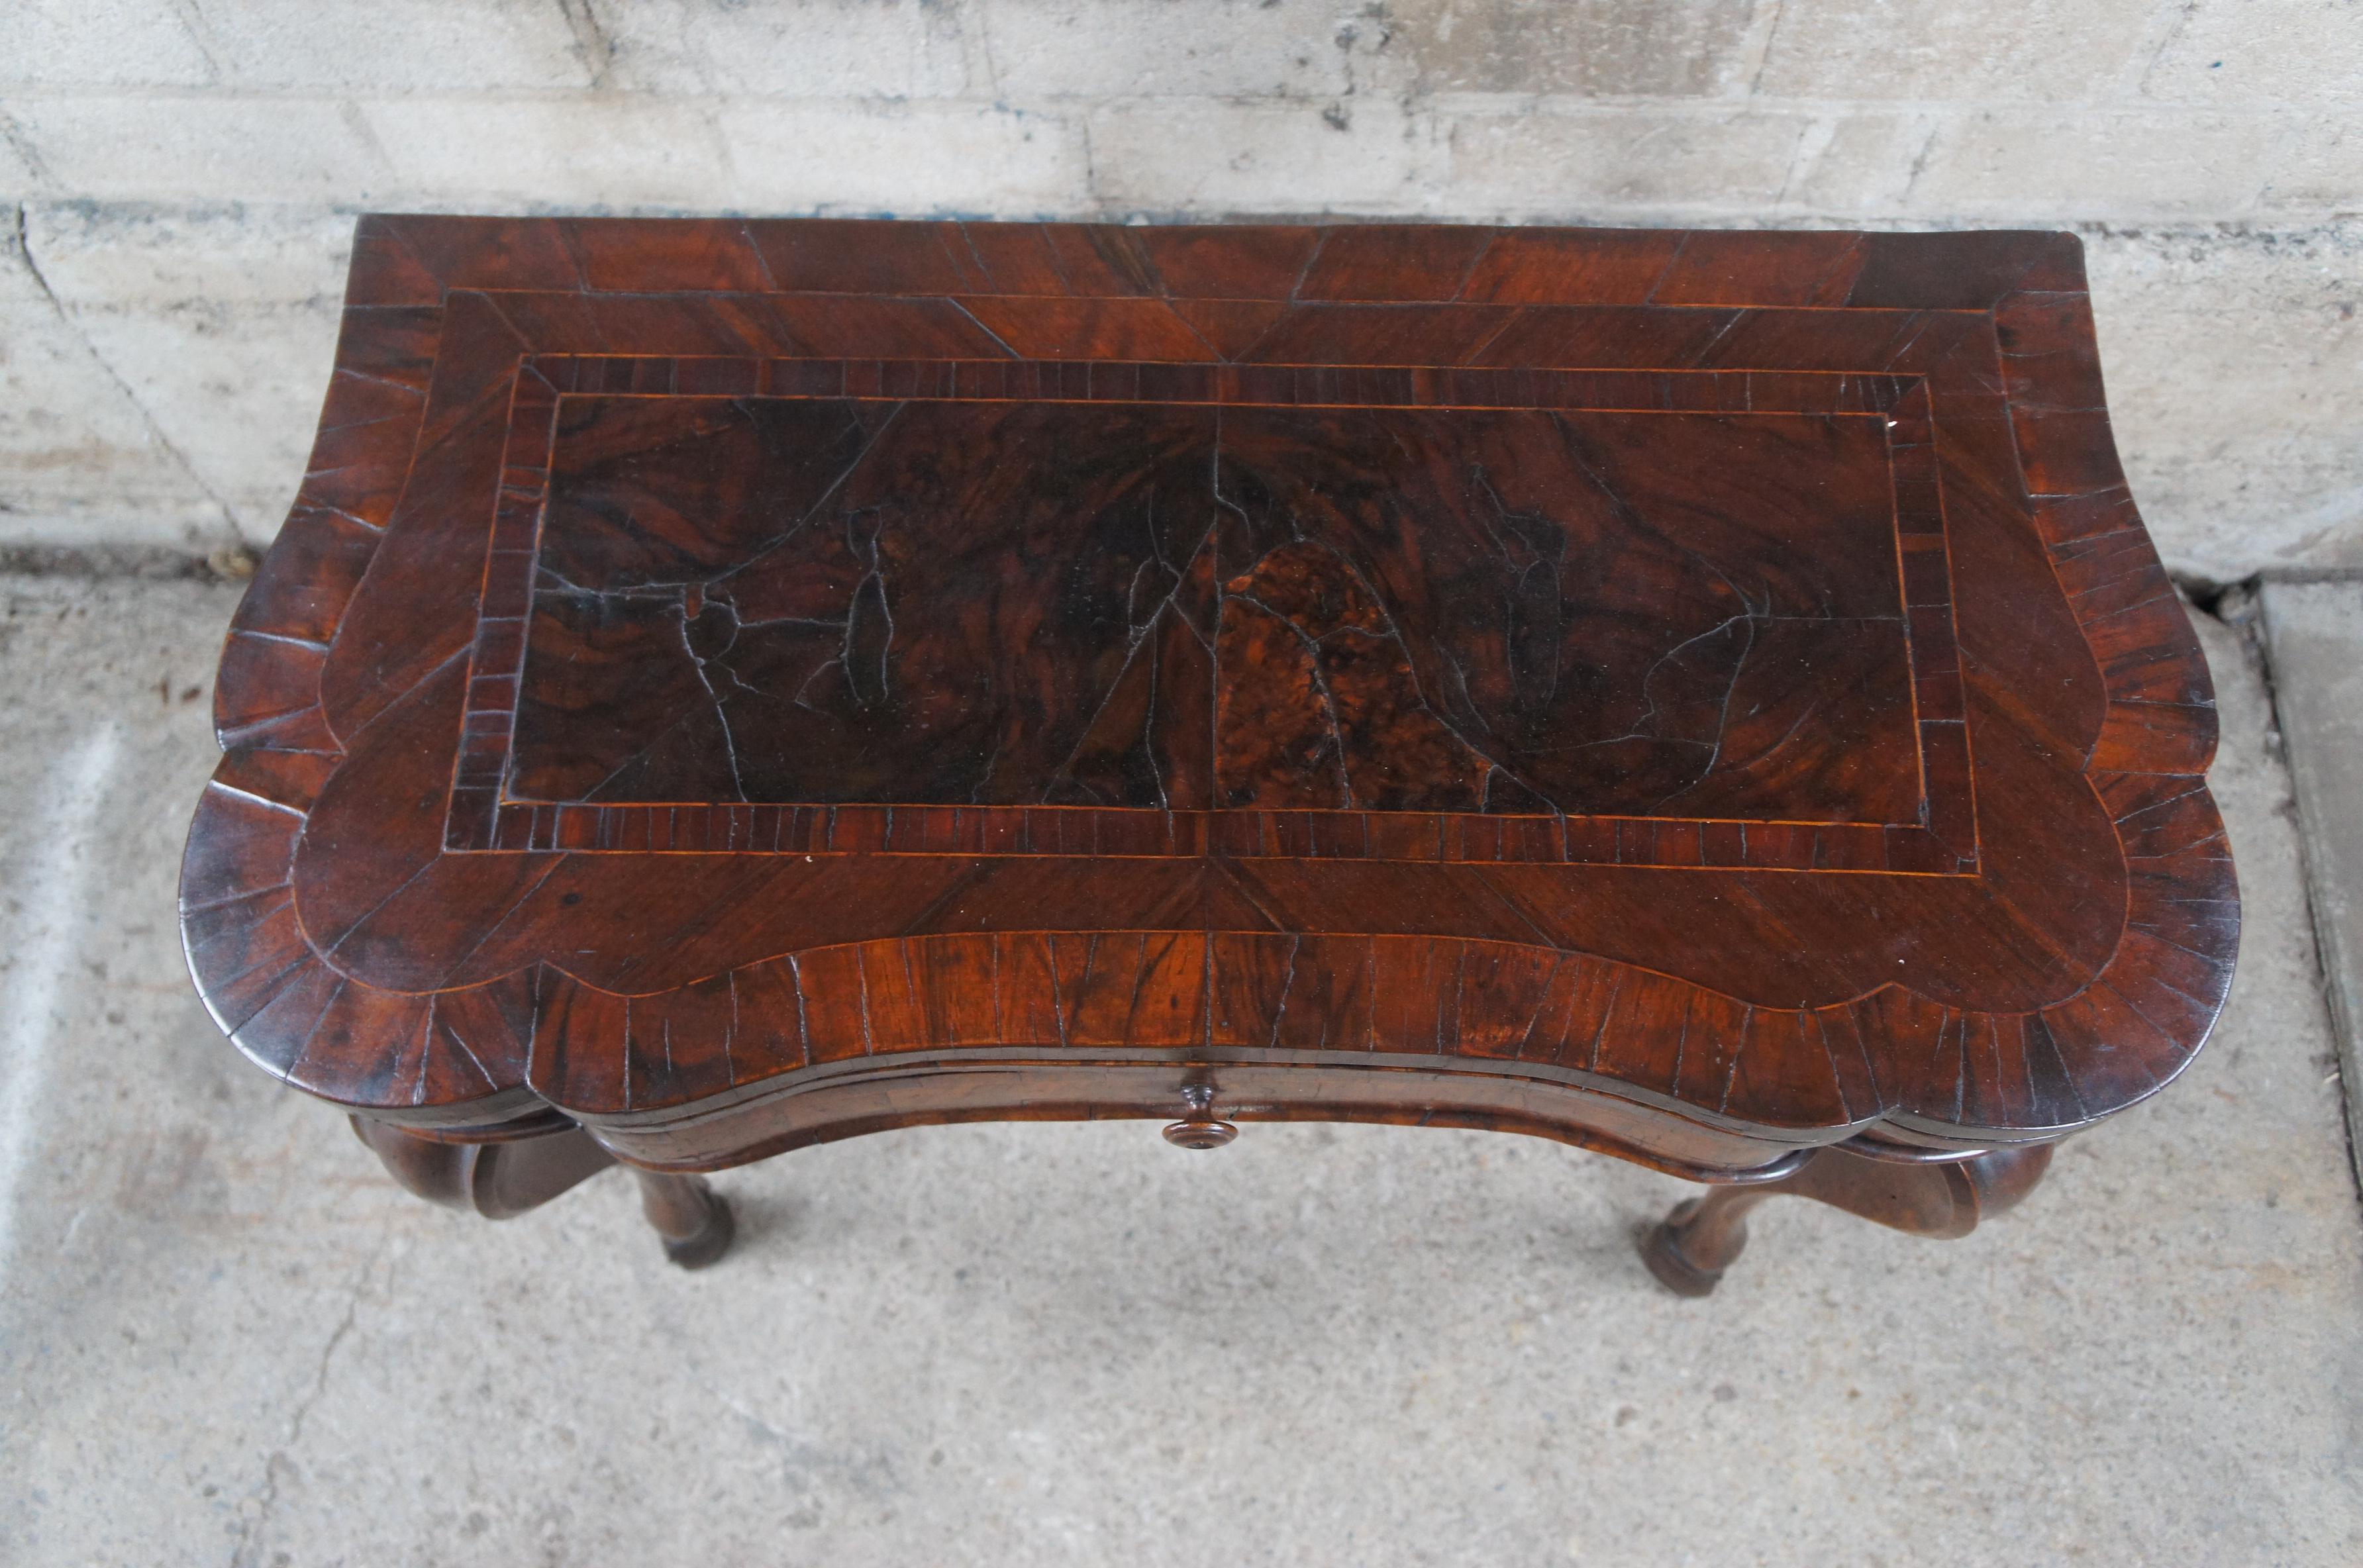 Early 19th Century Antique American Federal Empire Serpentine Flame Mahogany Game Console Table